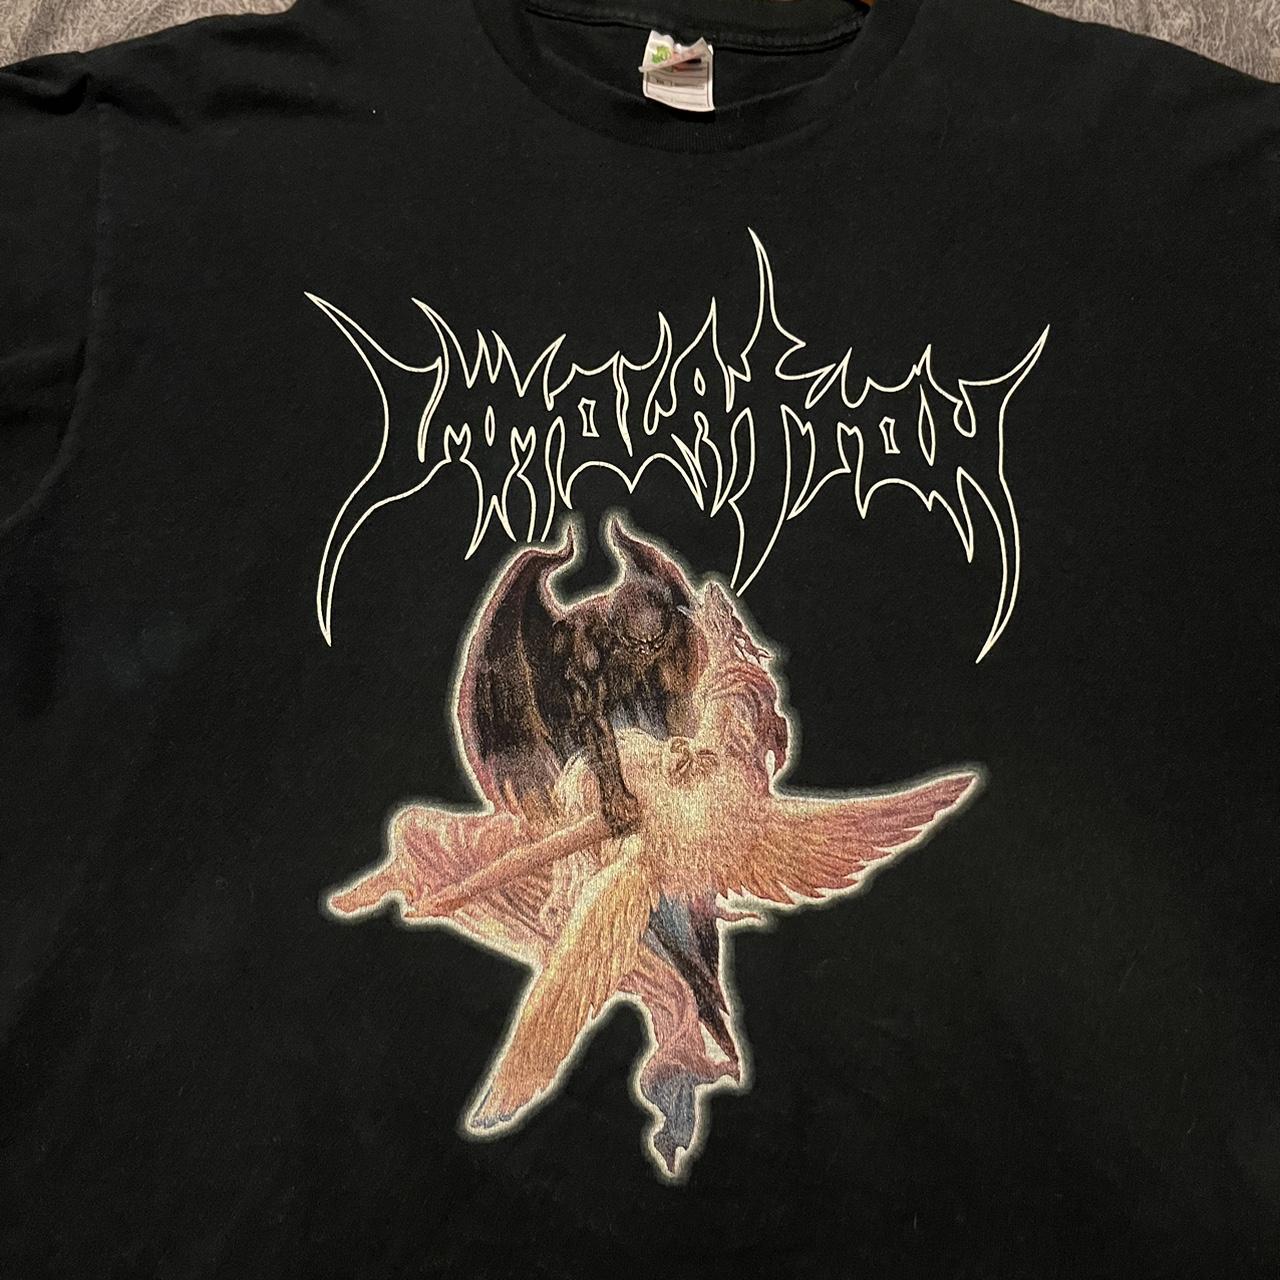 Immolation T-Shirt from 2003 Great Condition Size XL - Depop